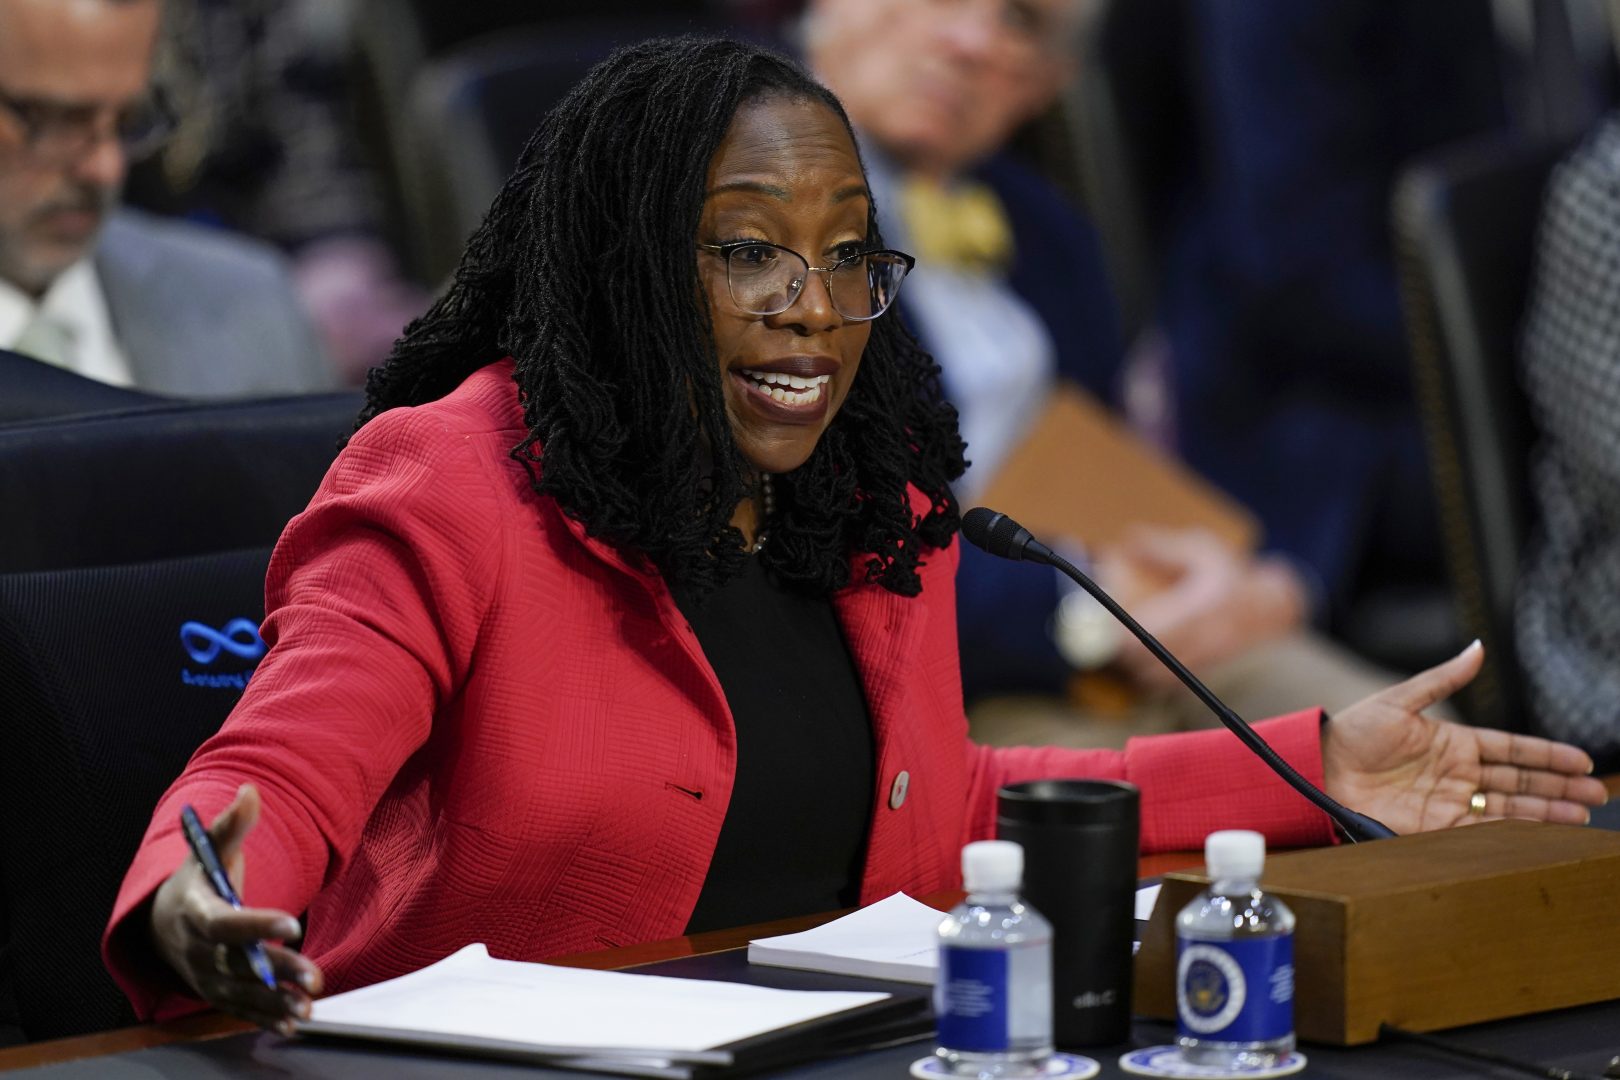 Supreme Court nominee Judge Ketanji Brown Jackson speaks during her confirmation hearing before the Senate Judiciary Committee Tuesday, March 22, 2022, on Capitol Hill in Washington.